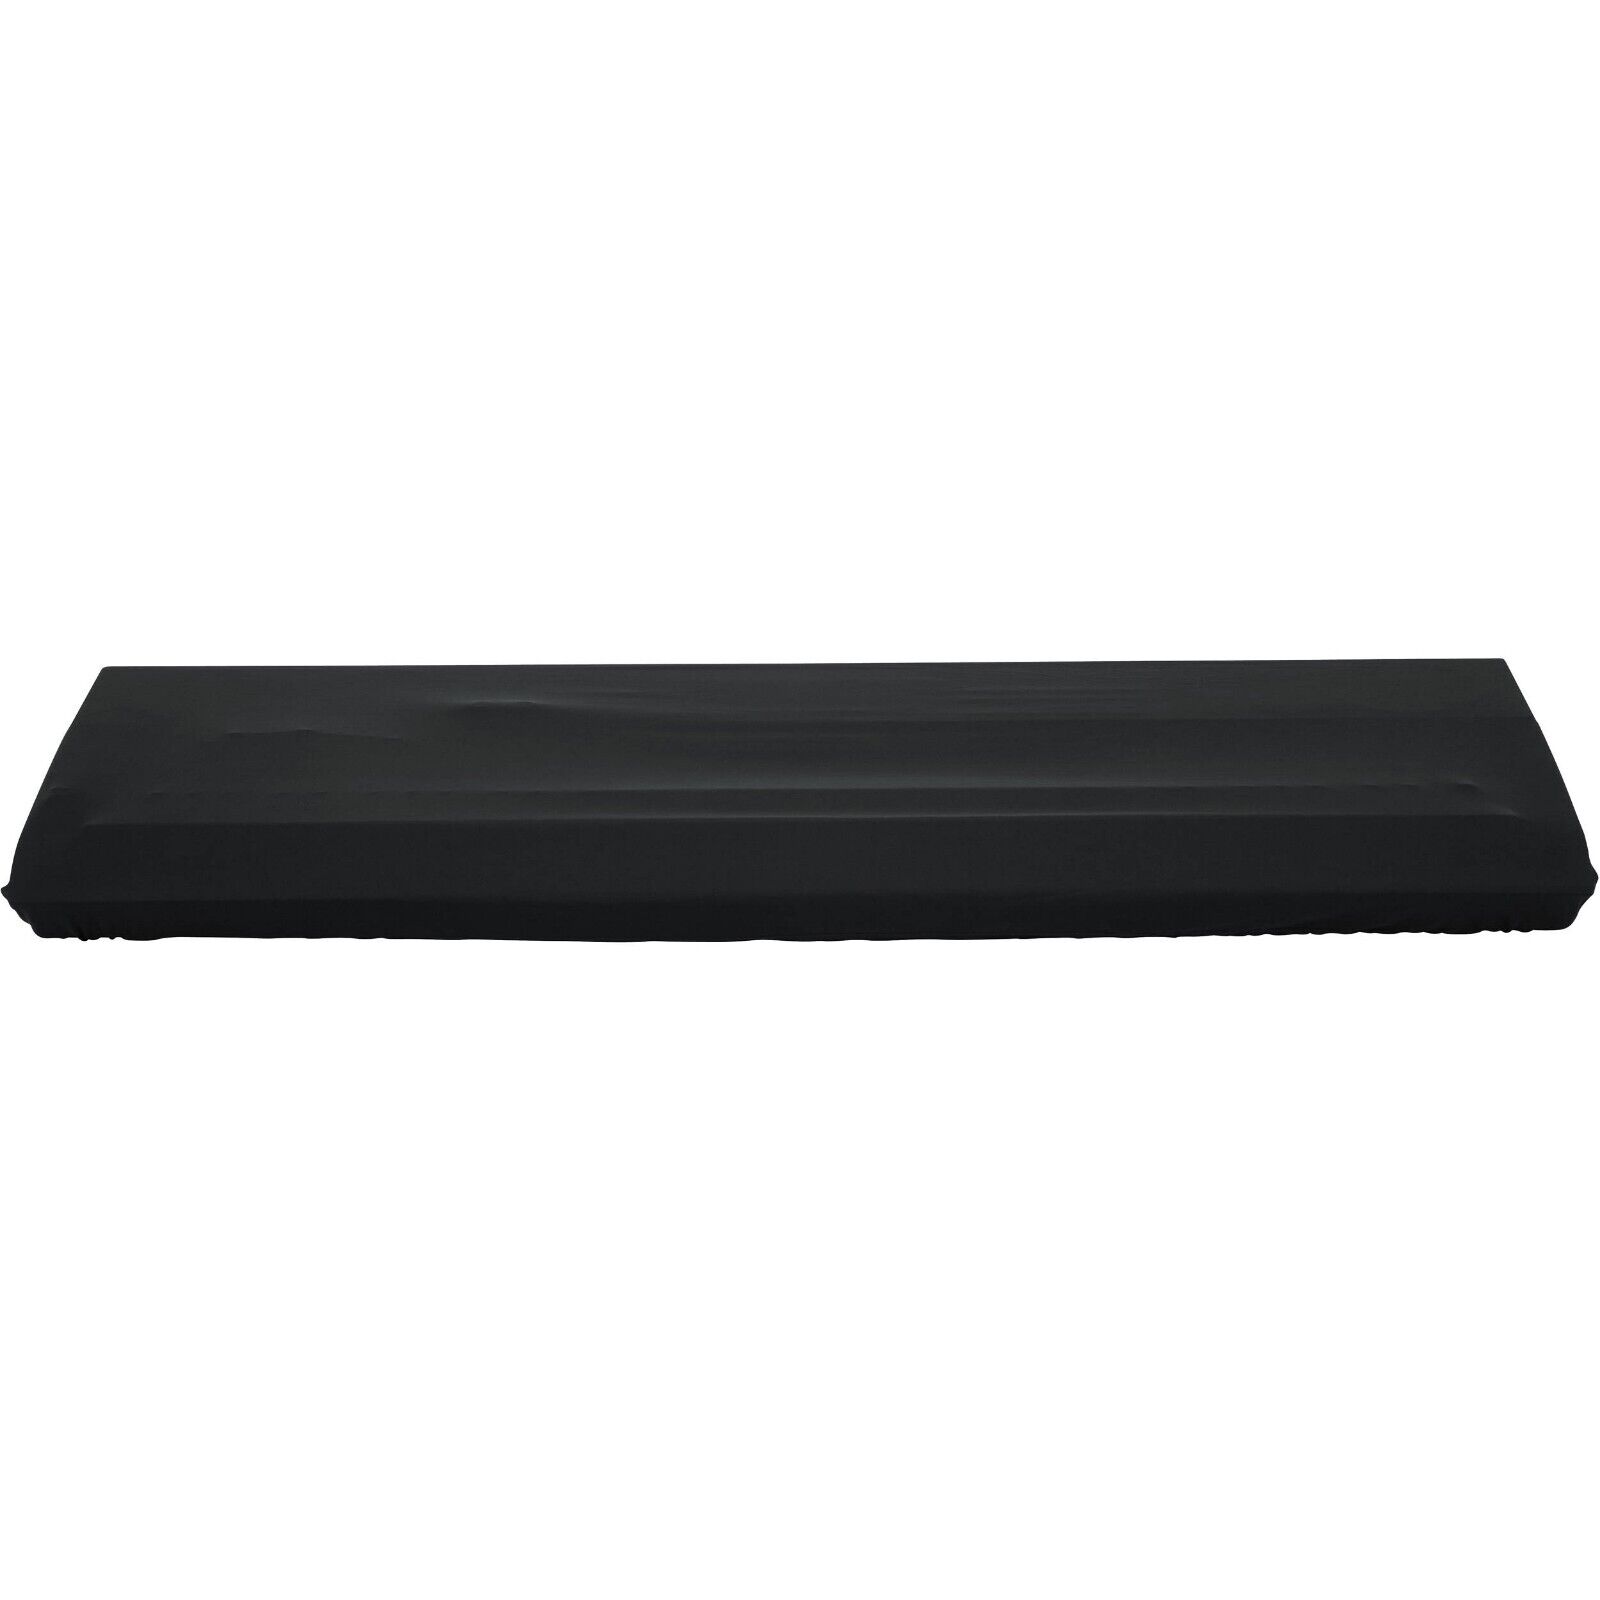 Gator - Gkc-1648 - Stretchy Cover Fits 88-note Keyboard - Black